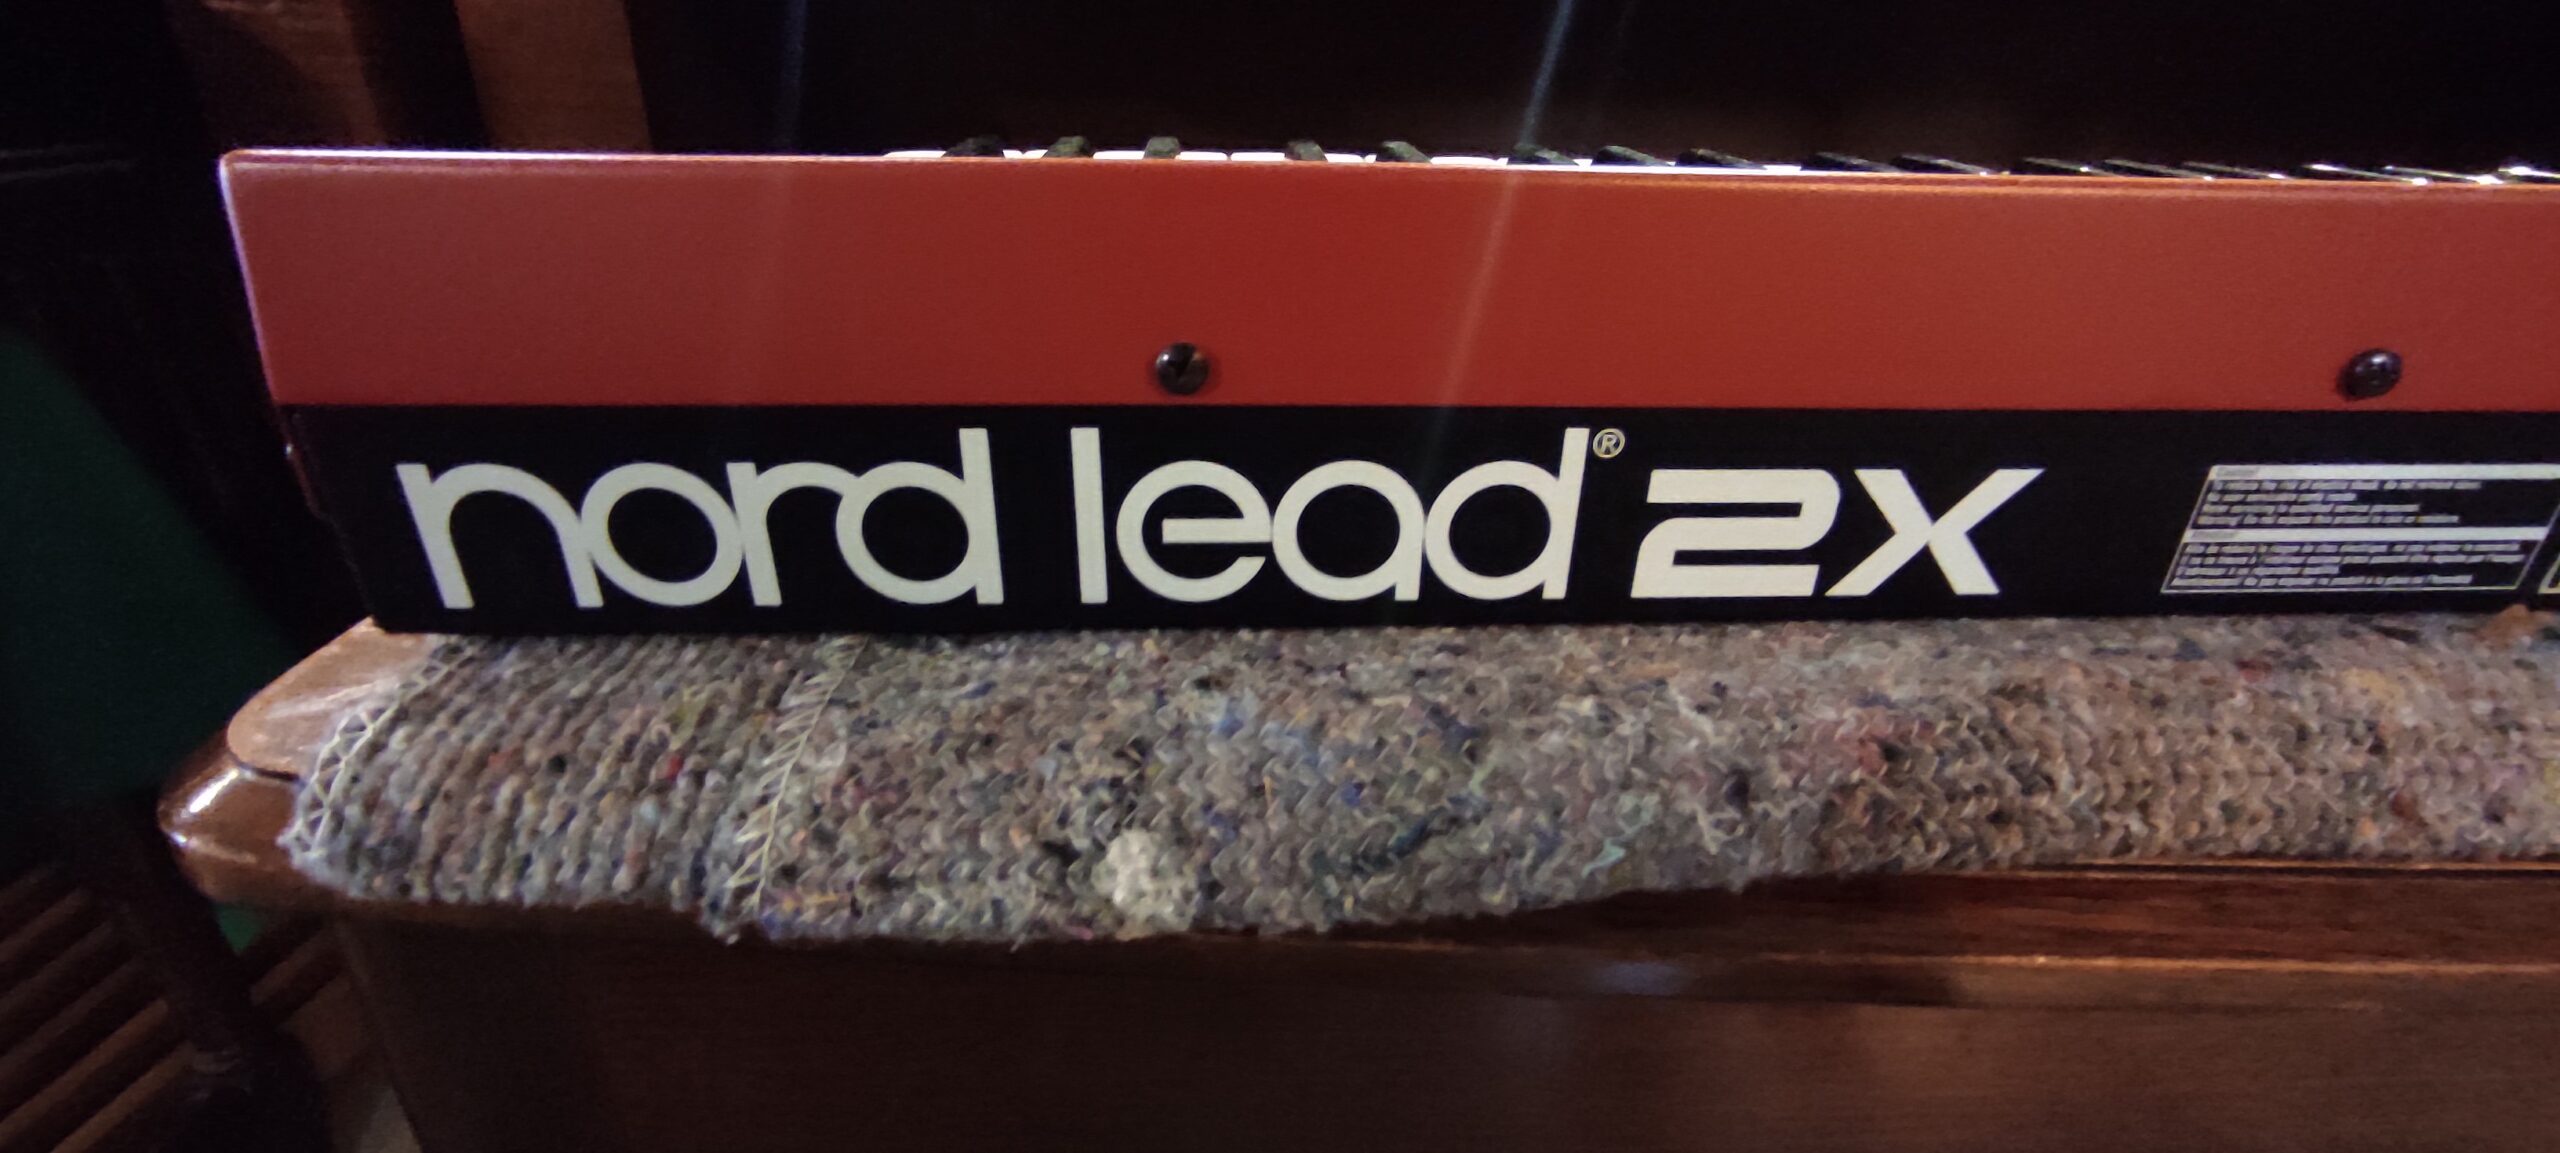 NORD LEAD 2X (8)